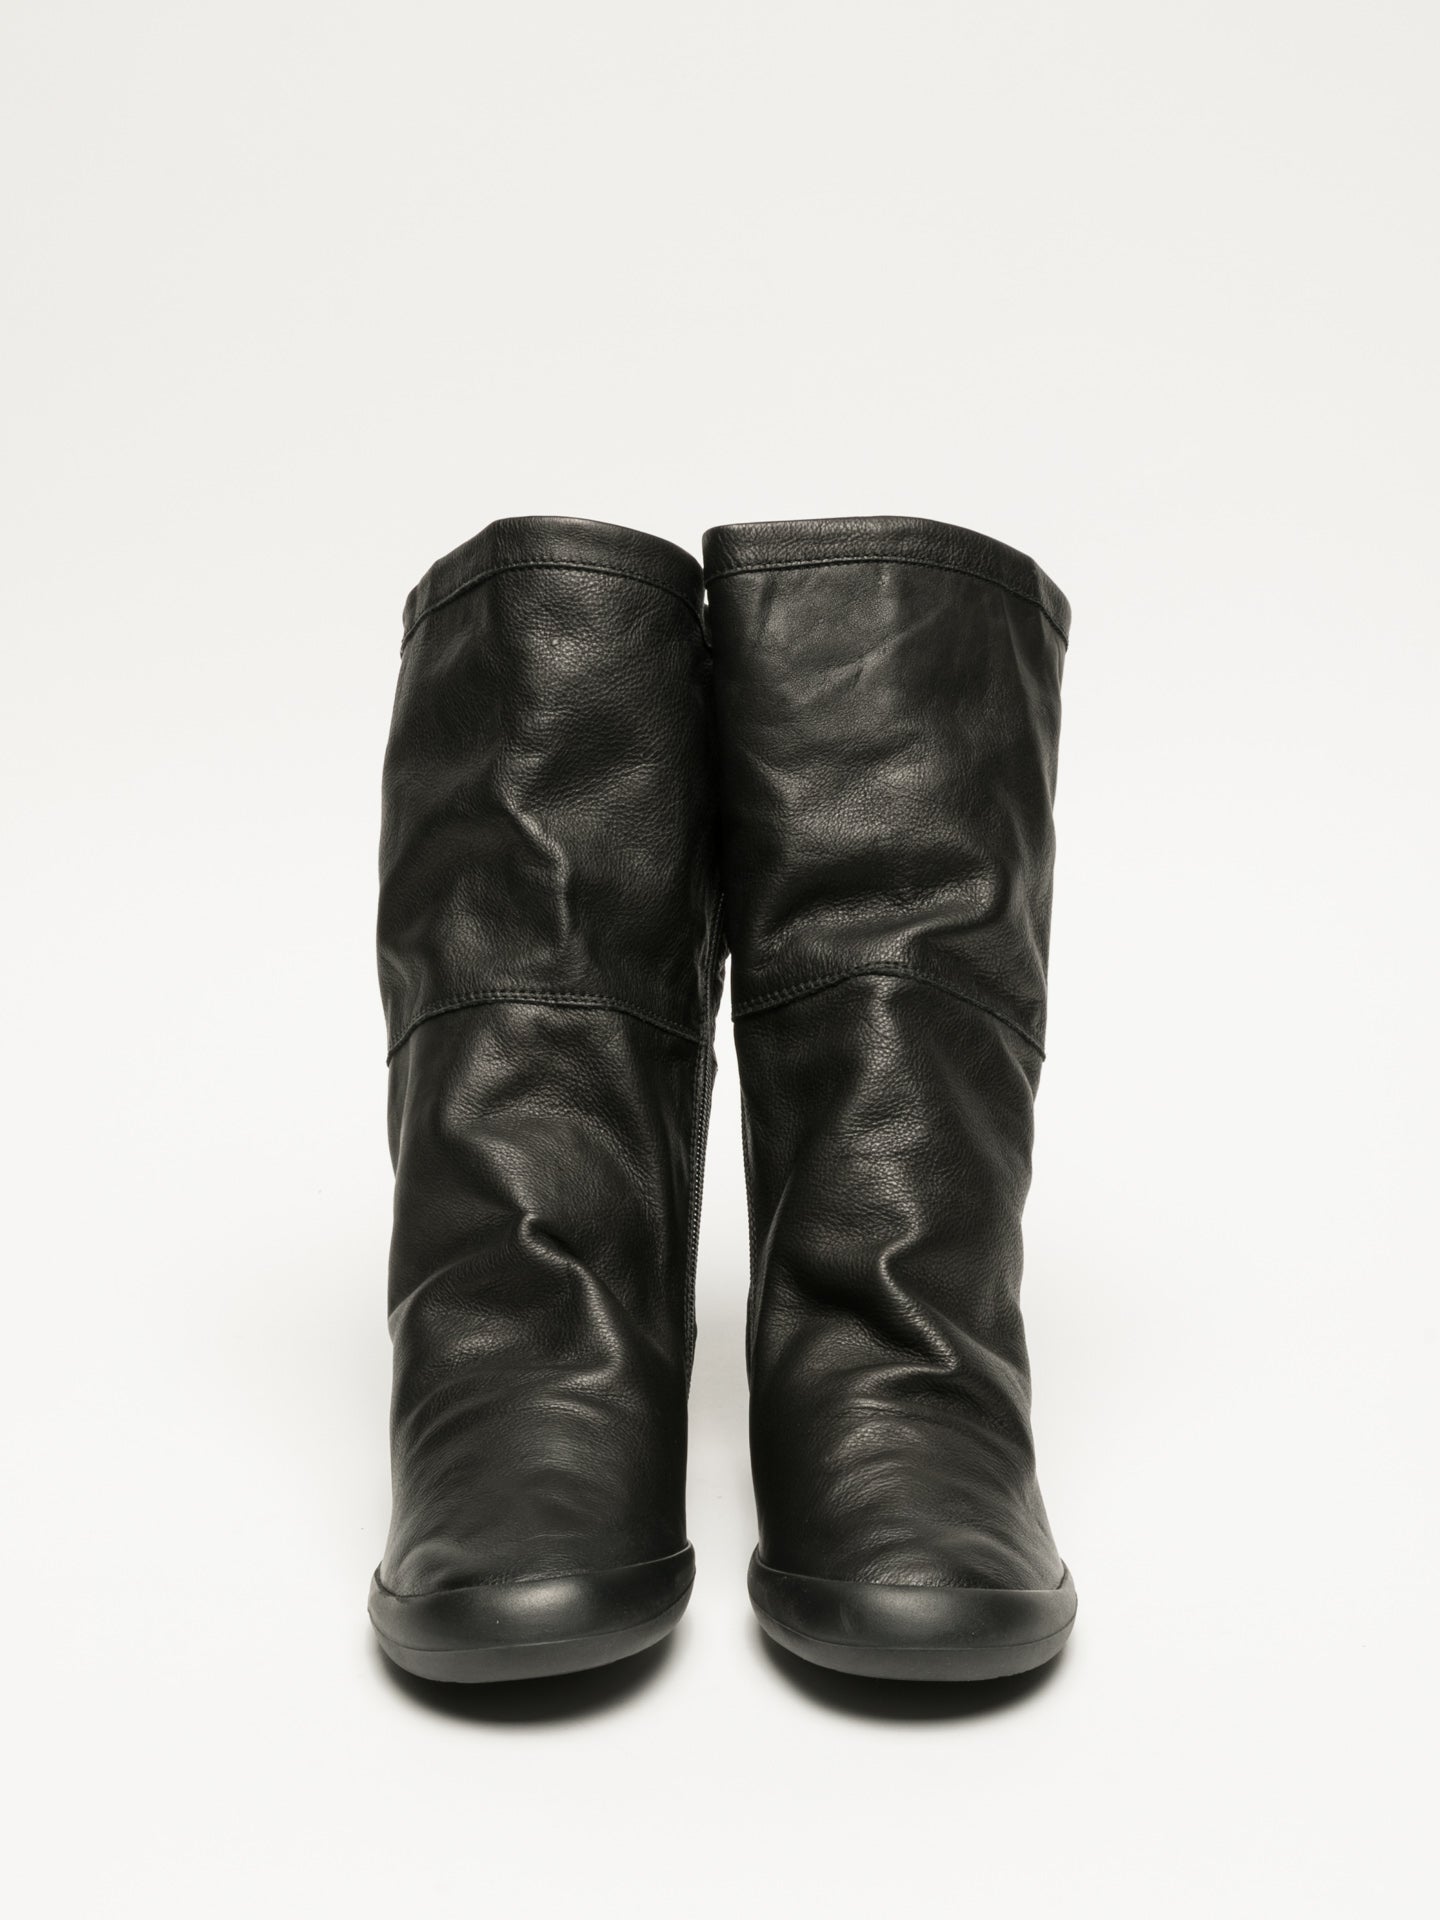 Softinos Carbon Black Knee-High Boots